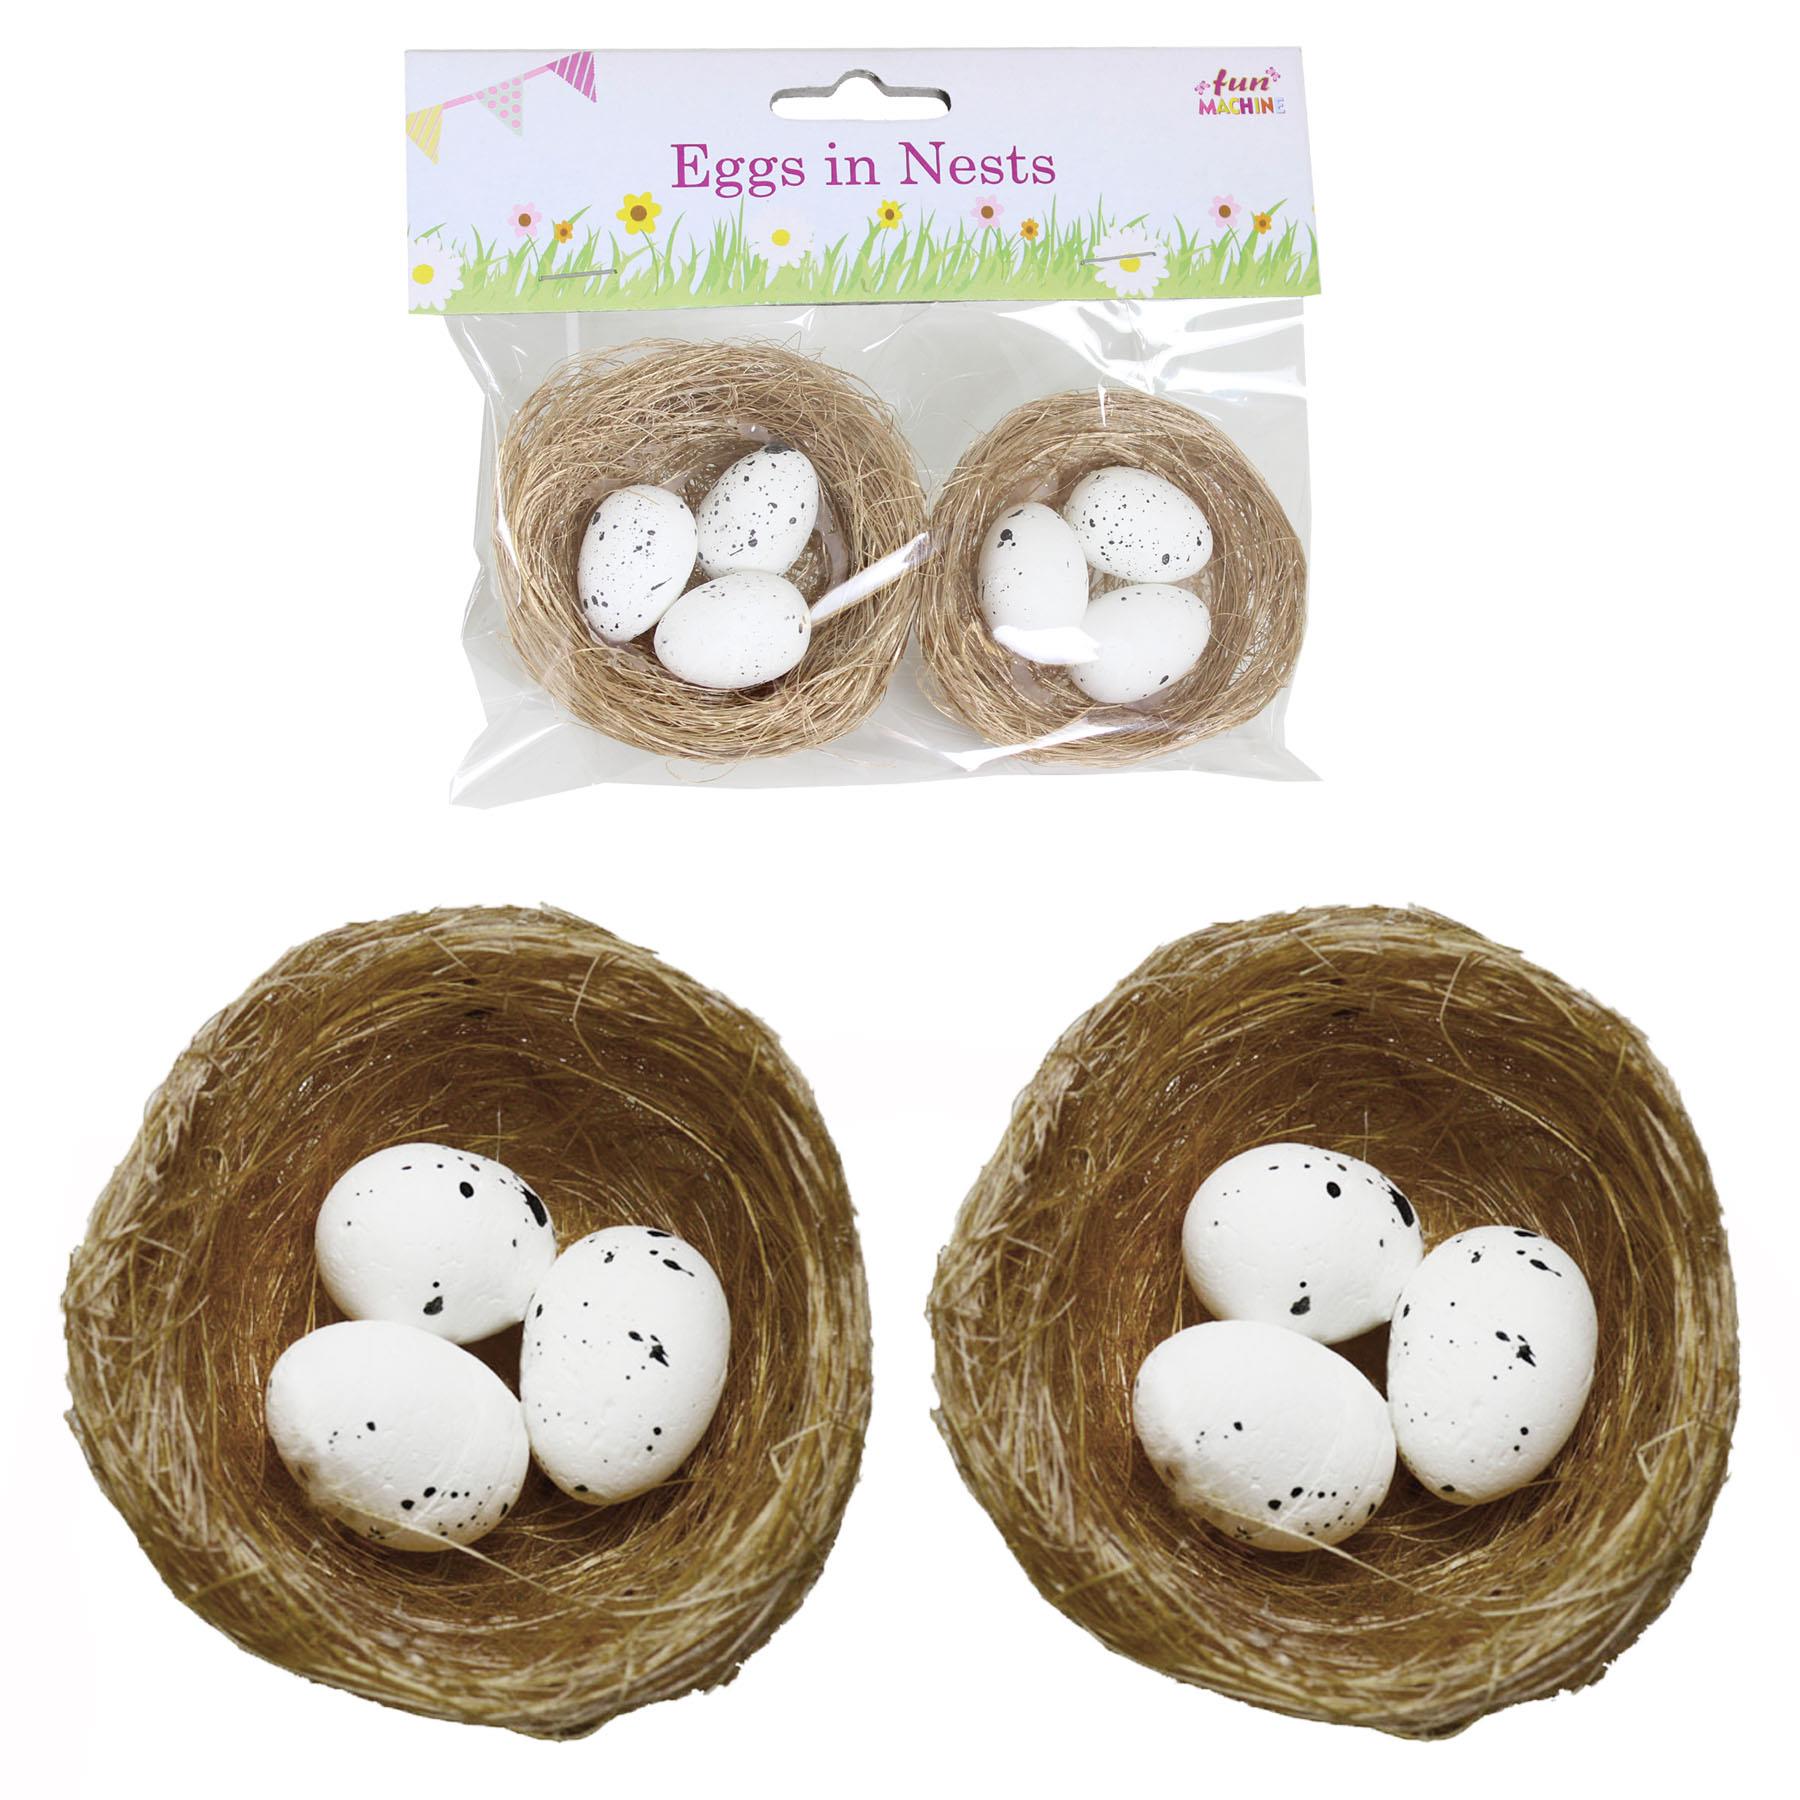 Easter Decorations, Bonnet Making, Arts and Crafts - 2 Pack Craft Nests 06563